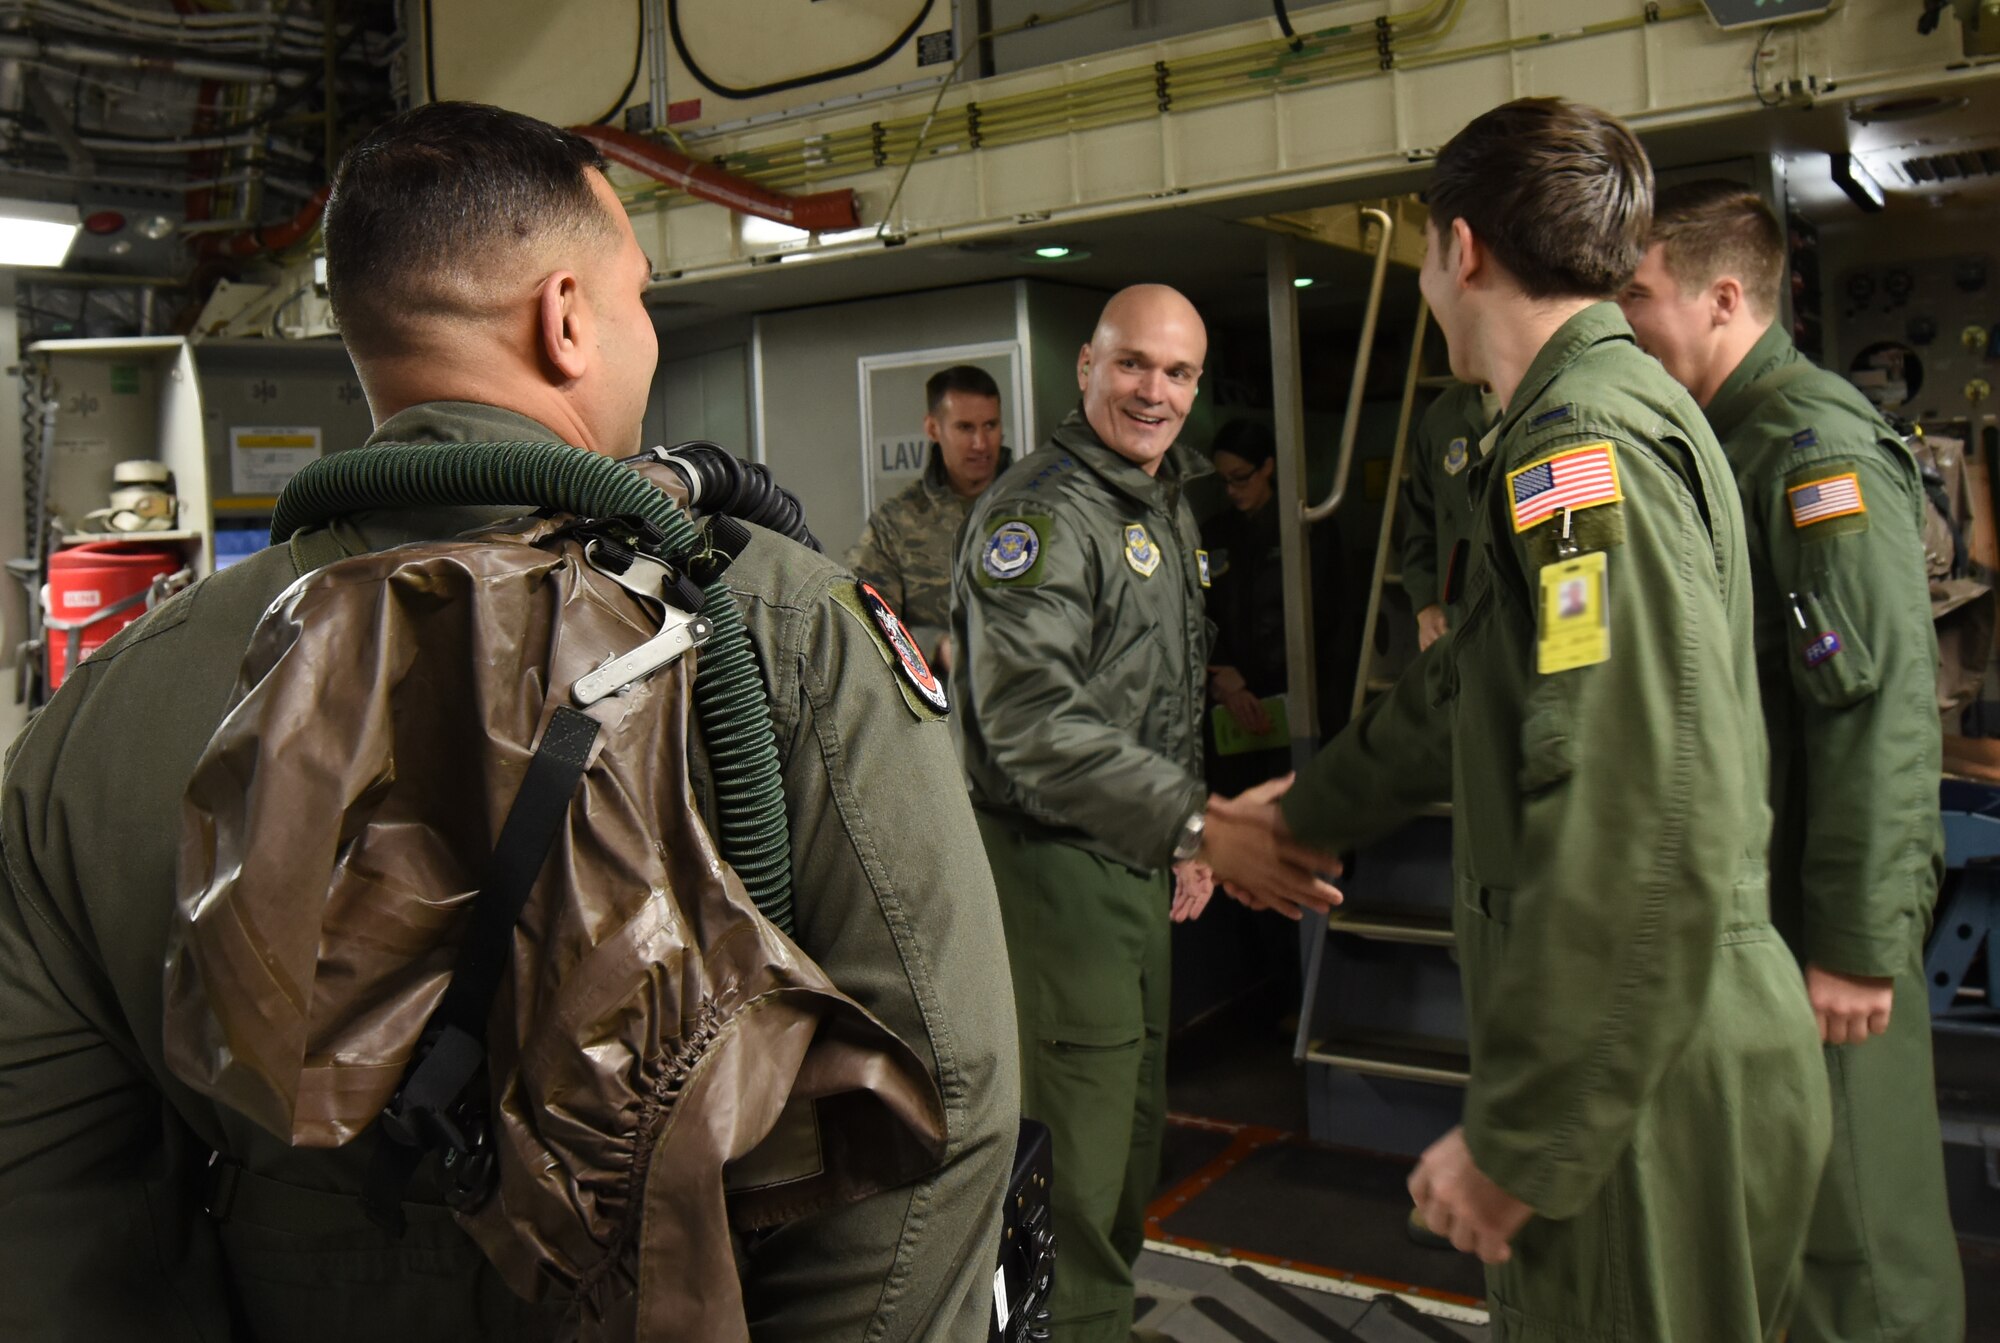 Gen. Carlton D. Everhart II, Air Mobility Command commander, meets 1st Lt. John Dewilder, 4th Airlift Squadron pilot, while greeting the C-17 Globemaster III crew of a C-17 Globemaster III he would be flying with at Joint Base Lewis-McChord, Wash., Jan. 25, 2018. Everhart visited JBLM to witness full-spectrum readiness in action during Team McChord’s Exercise Winterhook. (U.S. Air Force photo by Senior Airman Tryphena Mayhugh)